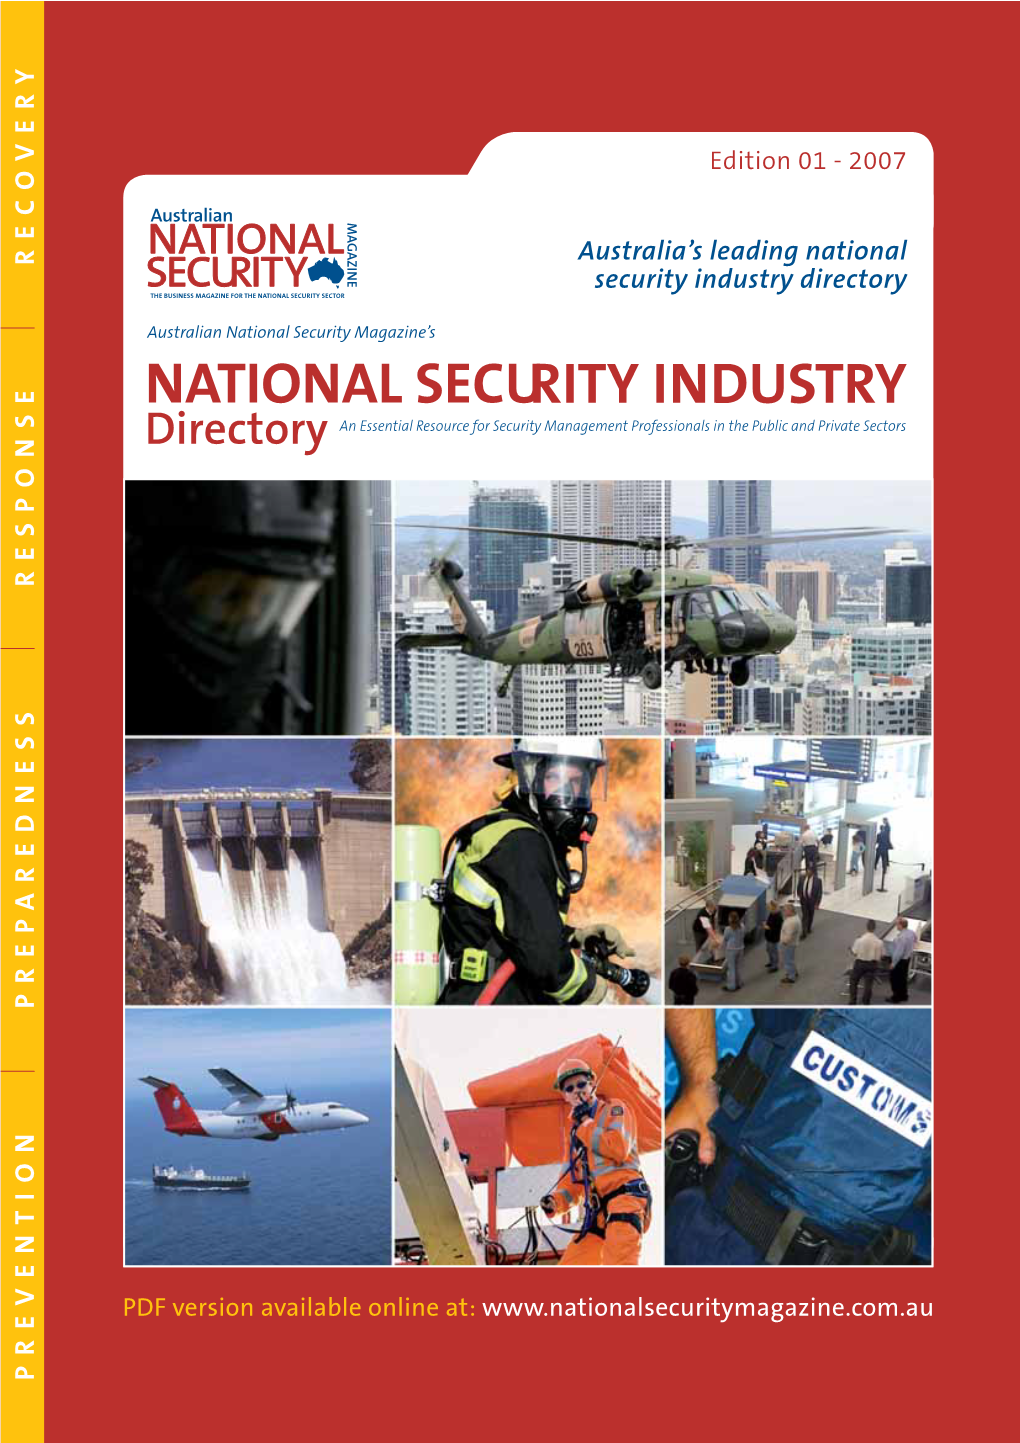 National Security Industry Directory the BUSINESS MAGAZINE for the NATIONAL SECURITY SECTOR